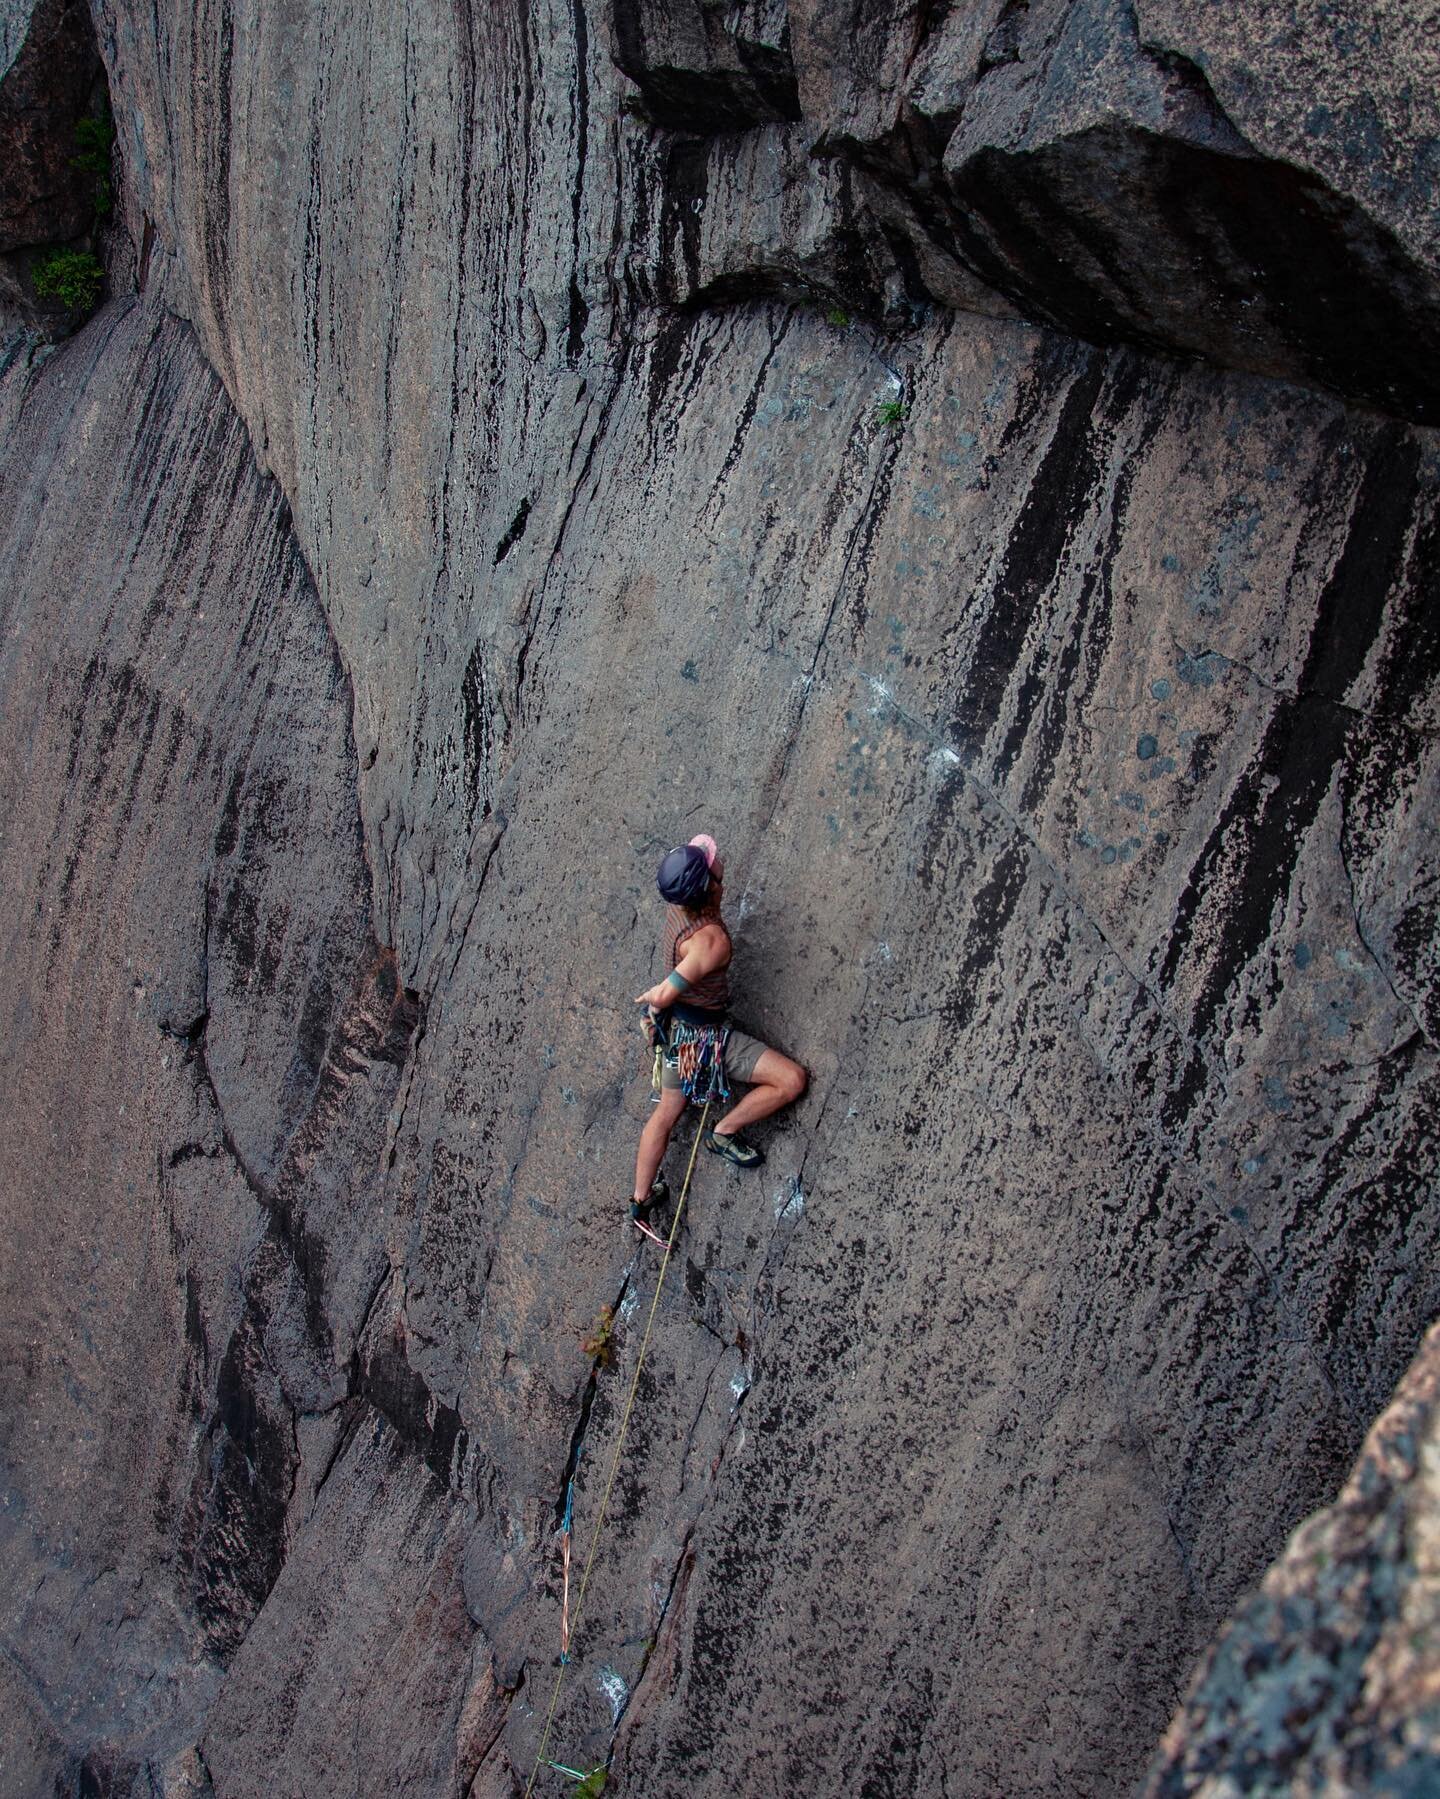 Wow!! 🤩😮 Check out these incredible shots by @mikericard_ 🔥

ACS guide, Reed, climbing &ldquo;Pressure Drop&rdquo; at The South Wall. Read his description below 👇 

&ldquo;Pressure Drop&rdquo; is a beautiful friction climb that leads to a bomber 